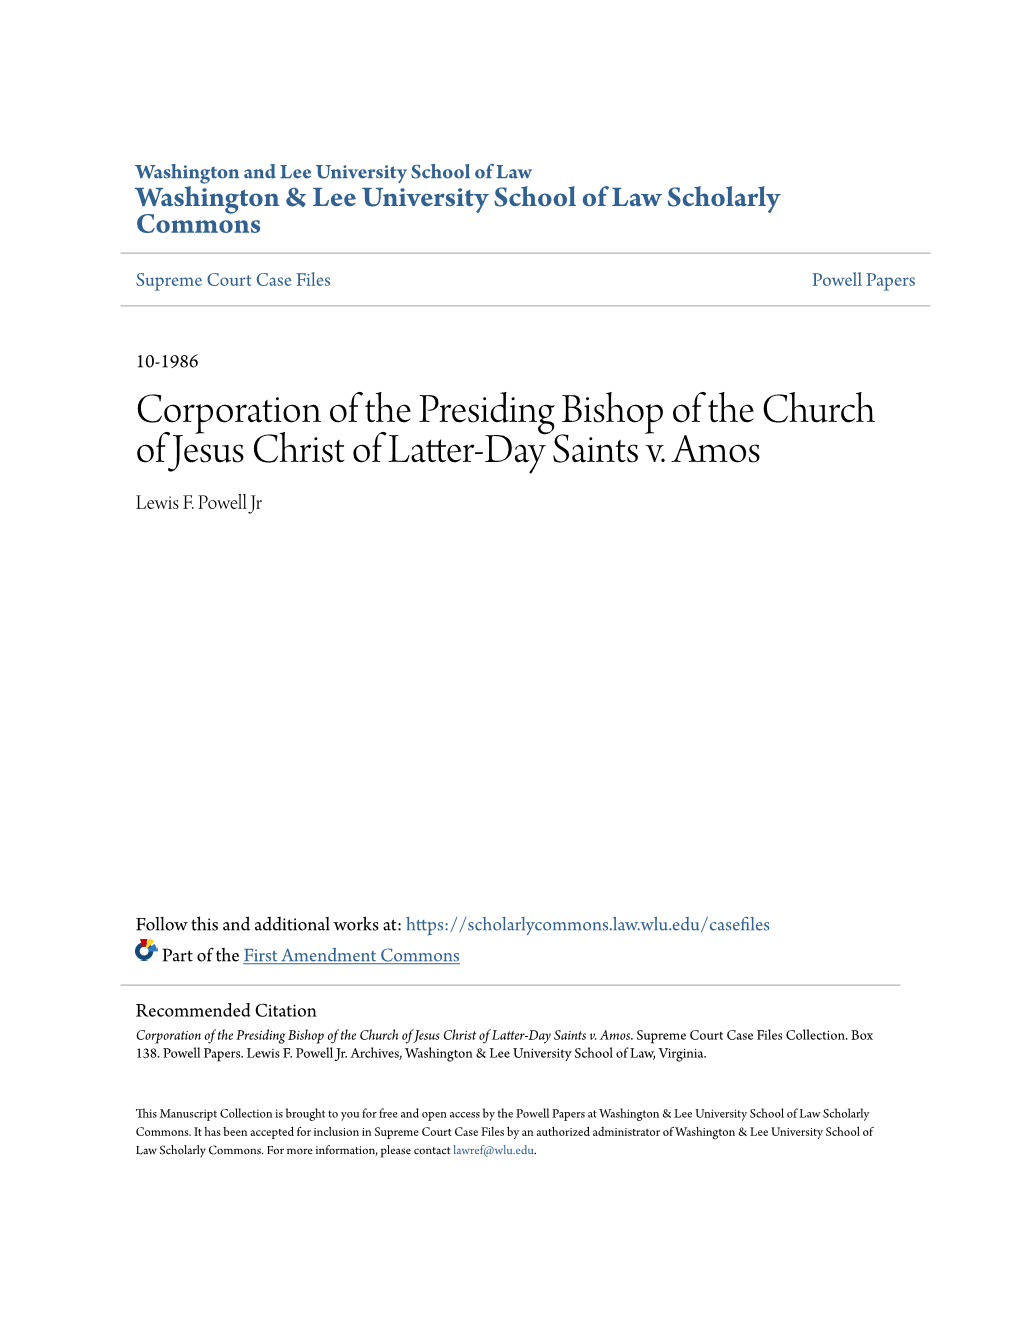 Corporation of the Presiding Bishop of the Church of Jesus Christ of Latter-Day Saints V